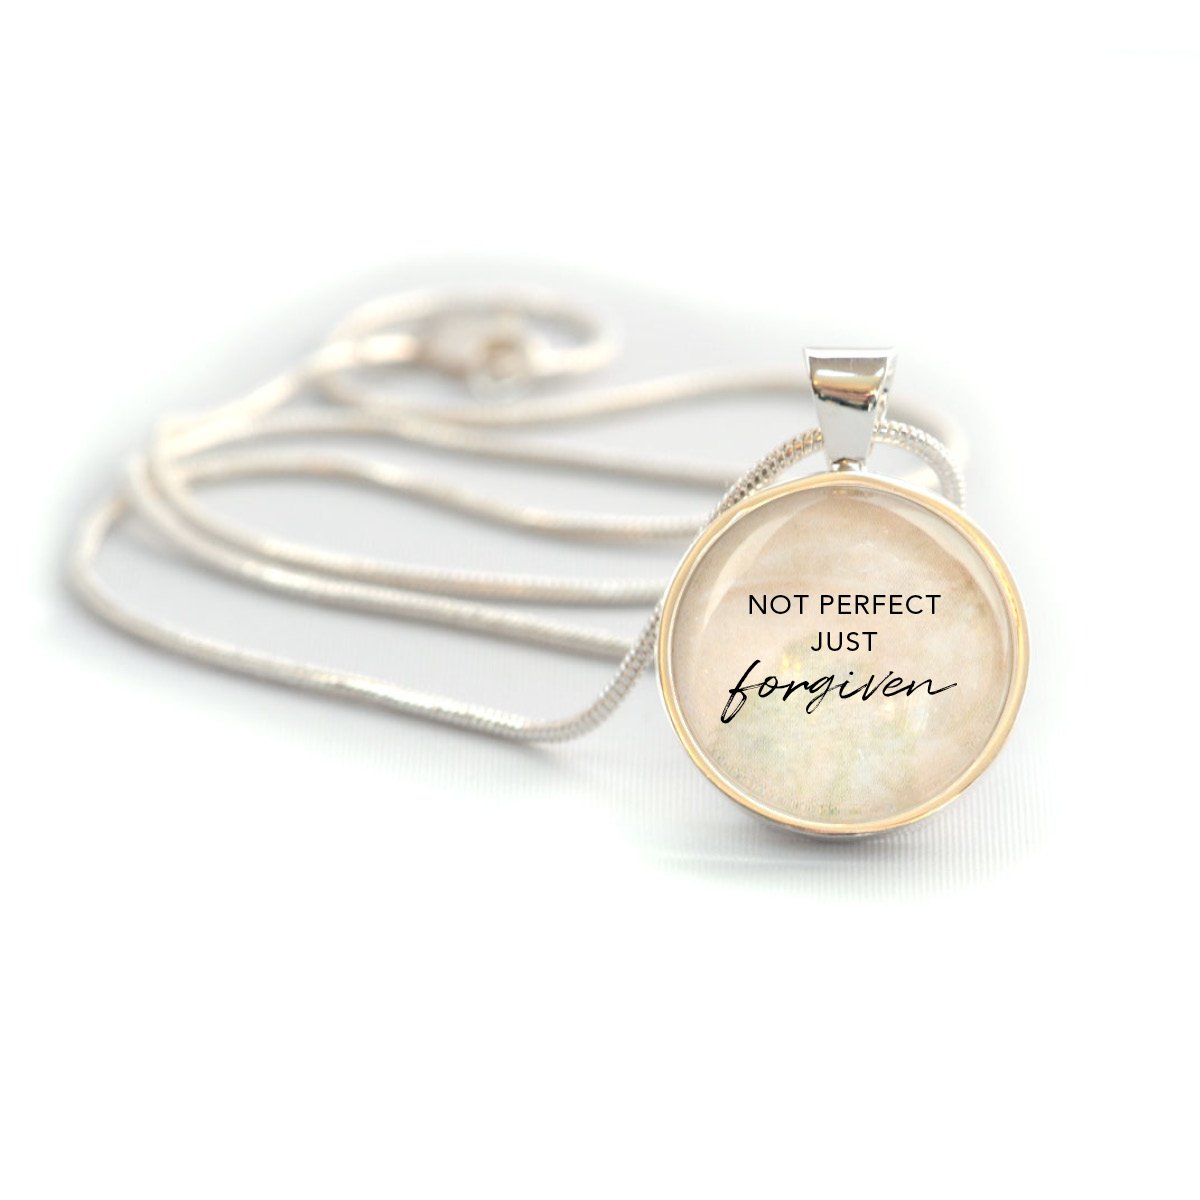 "Not Perfect, Just Forgiven" Silver-Plated Christian Pendant Necklace